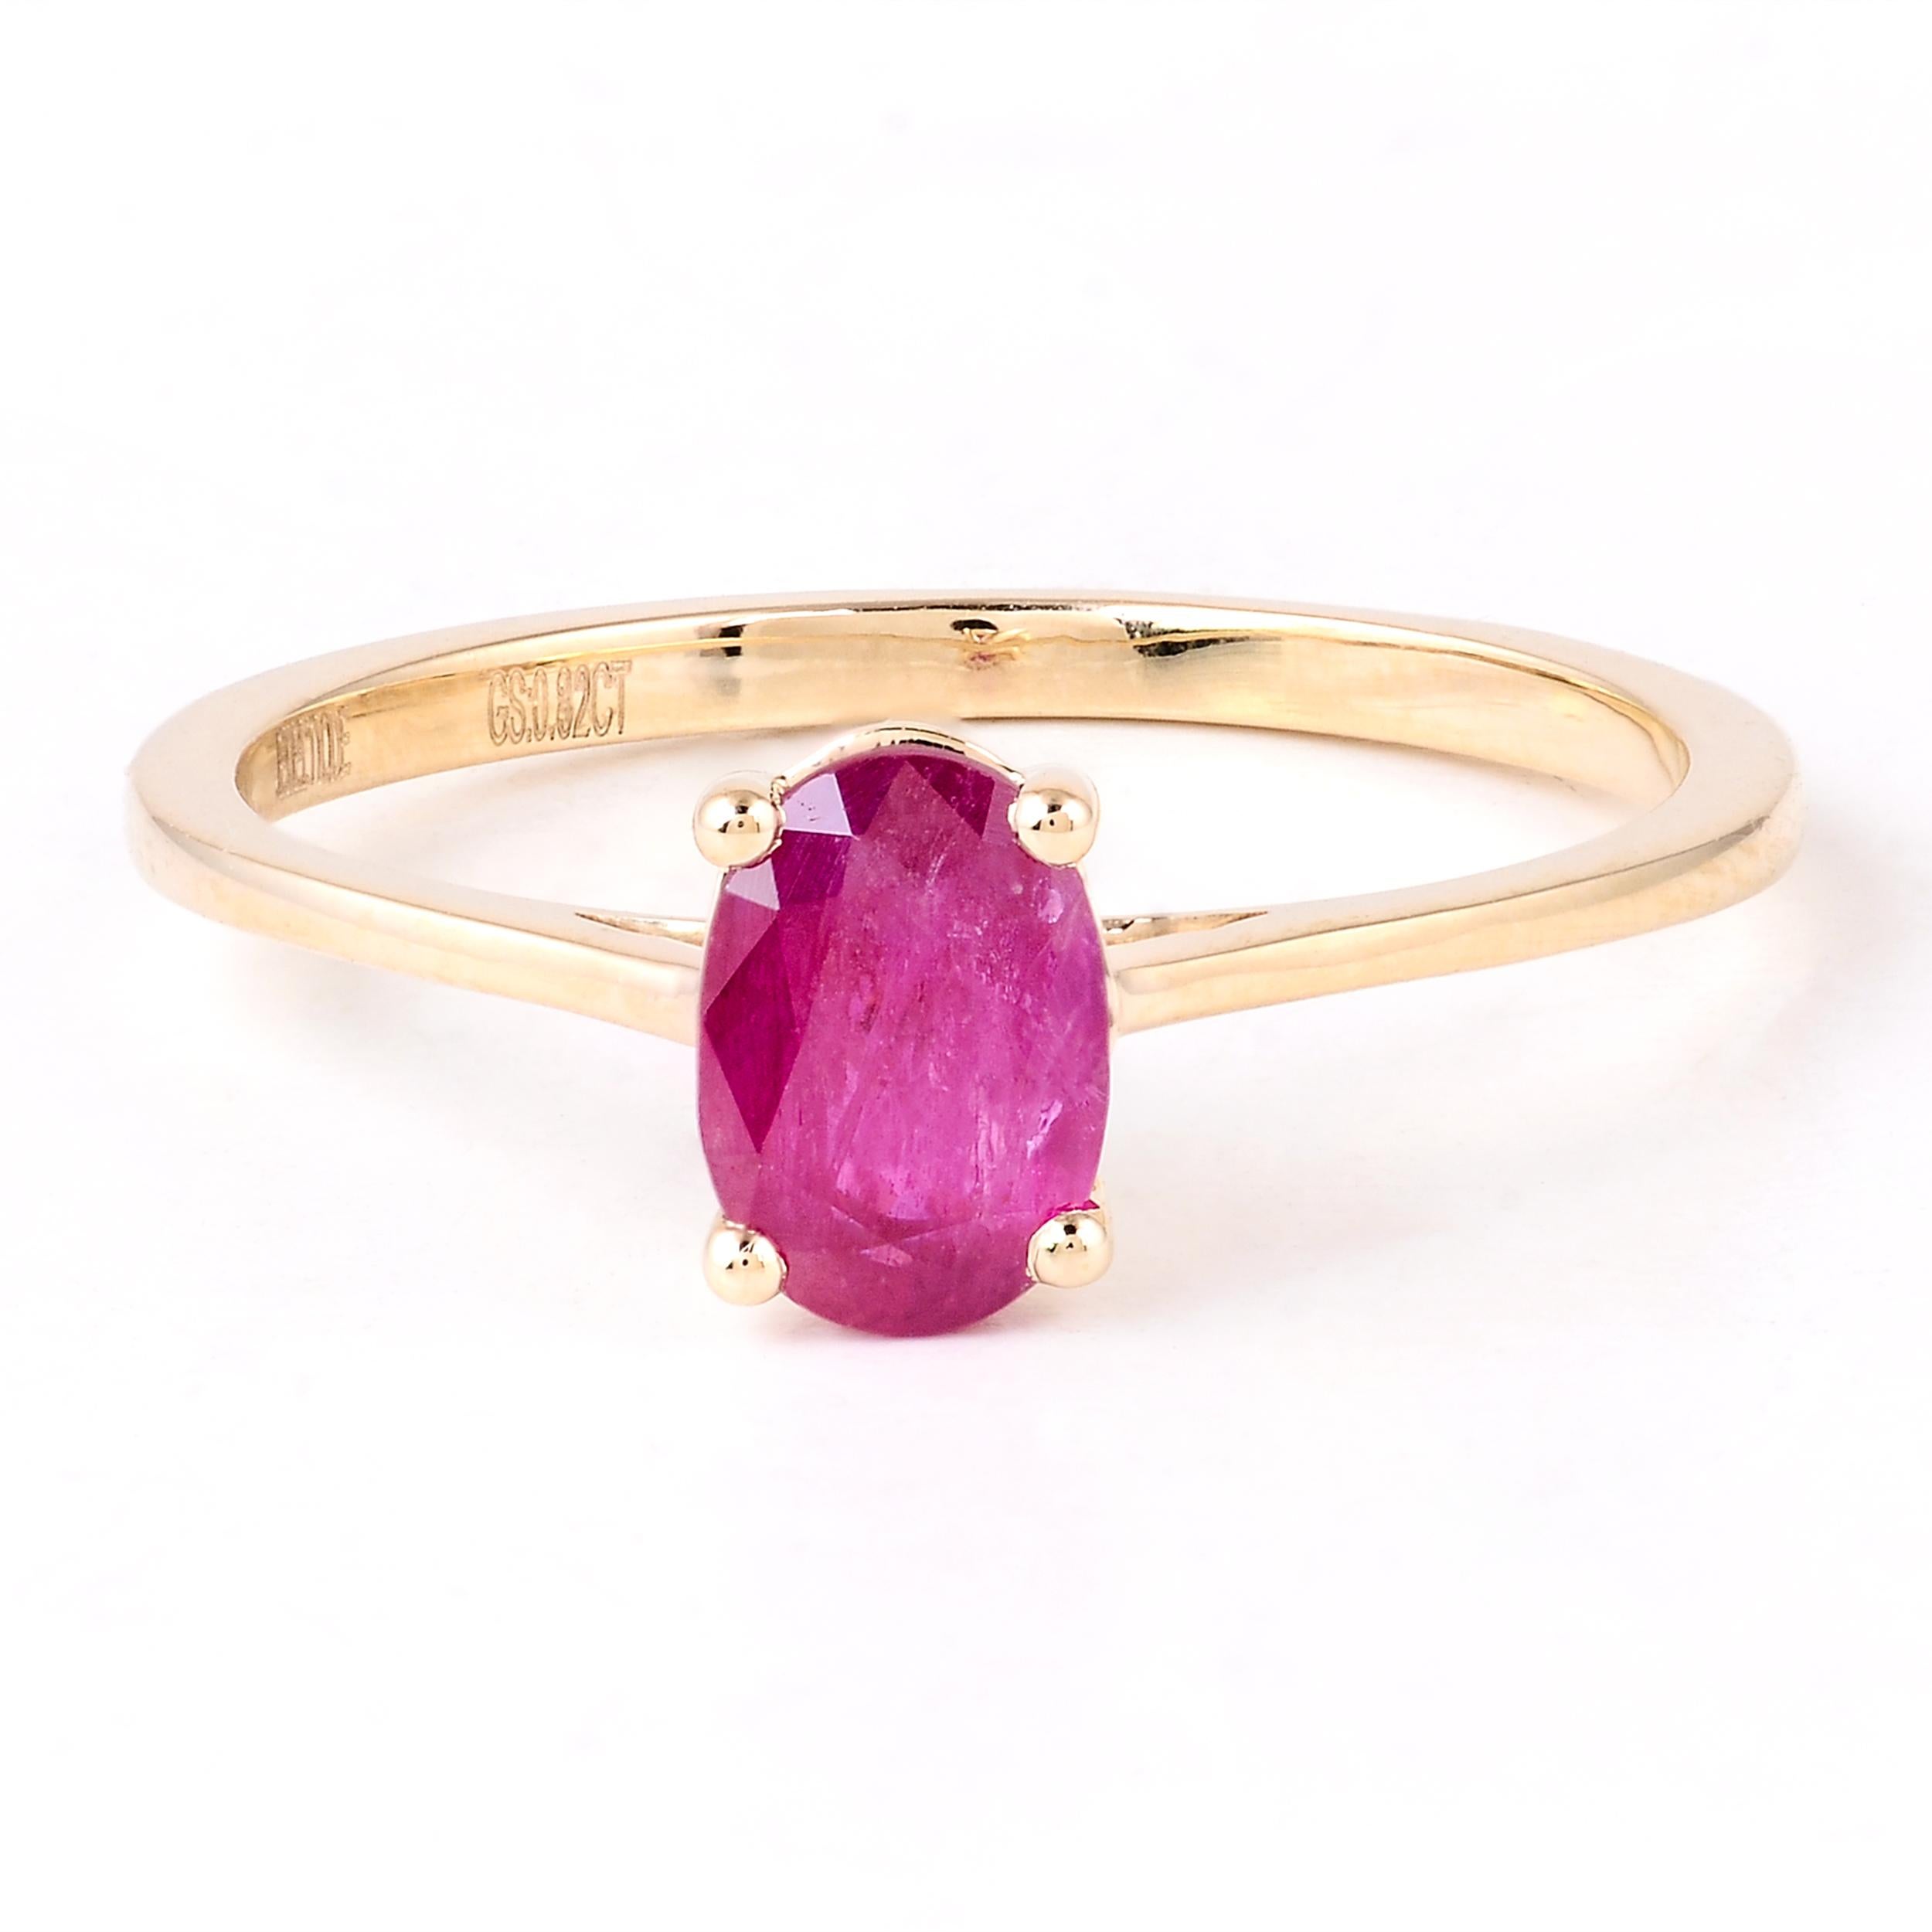 Elegant 14K Ruby Cocktail Ring, Size 6.75 - Luxury Statement Jewelry Piece In New Condition For Sale In Holtsville, NY